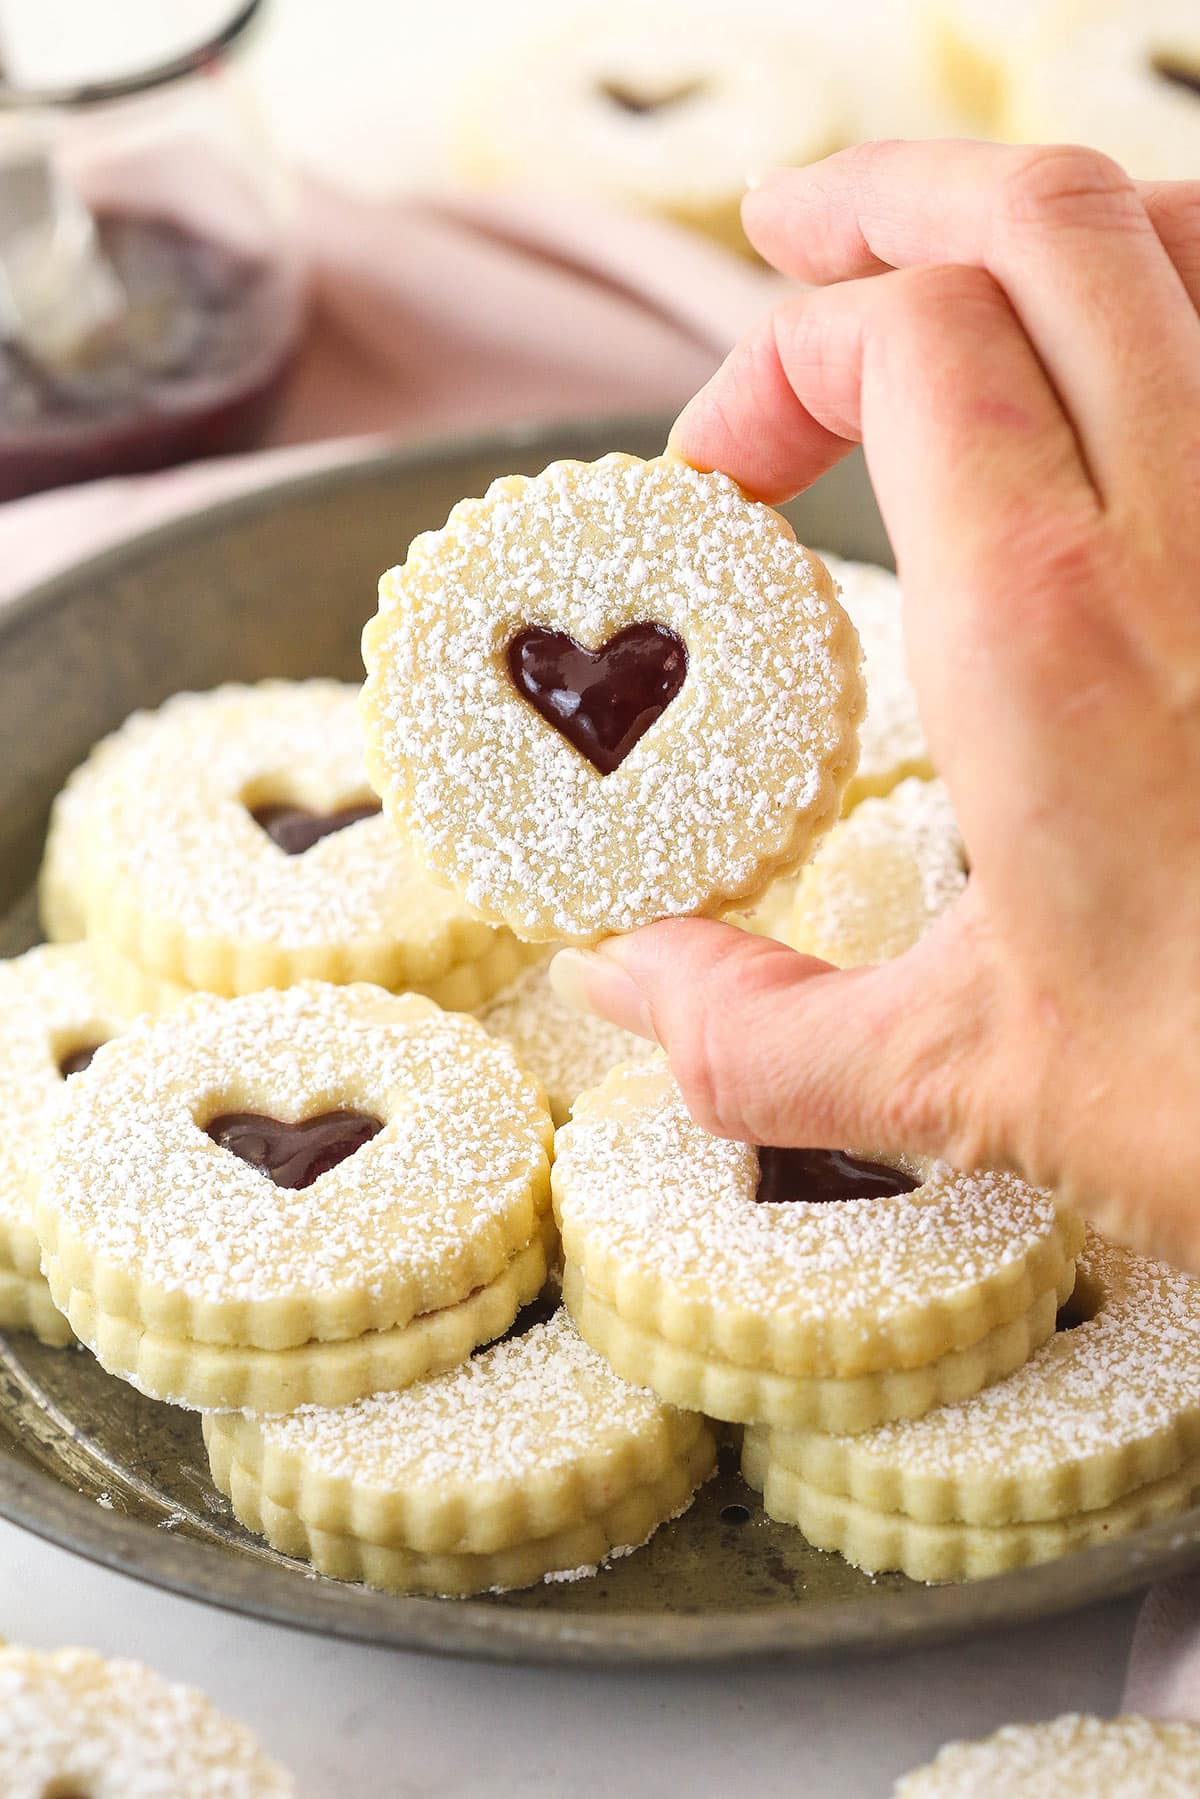 Holding up a linzer tart cookie in between two fingers.